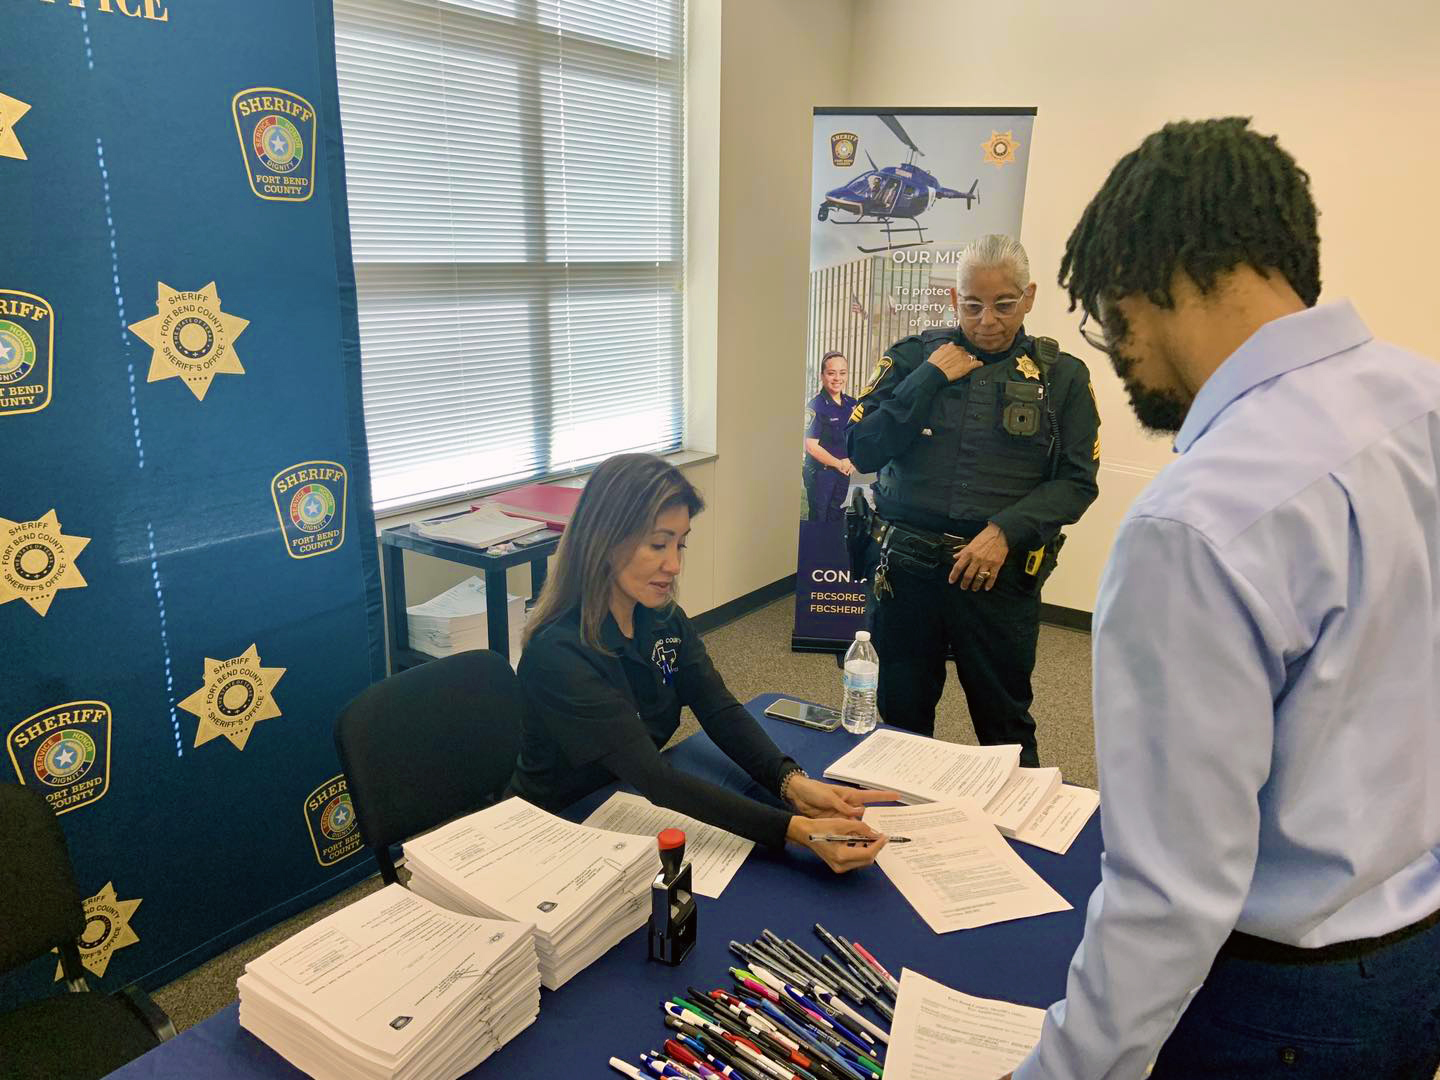 Fort Bend County Sheriff's Office to Host Career Expo on May 11